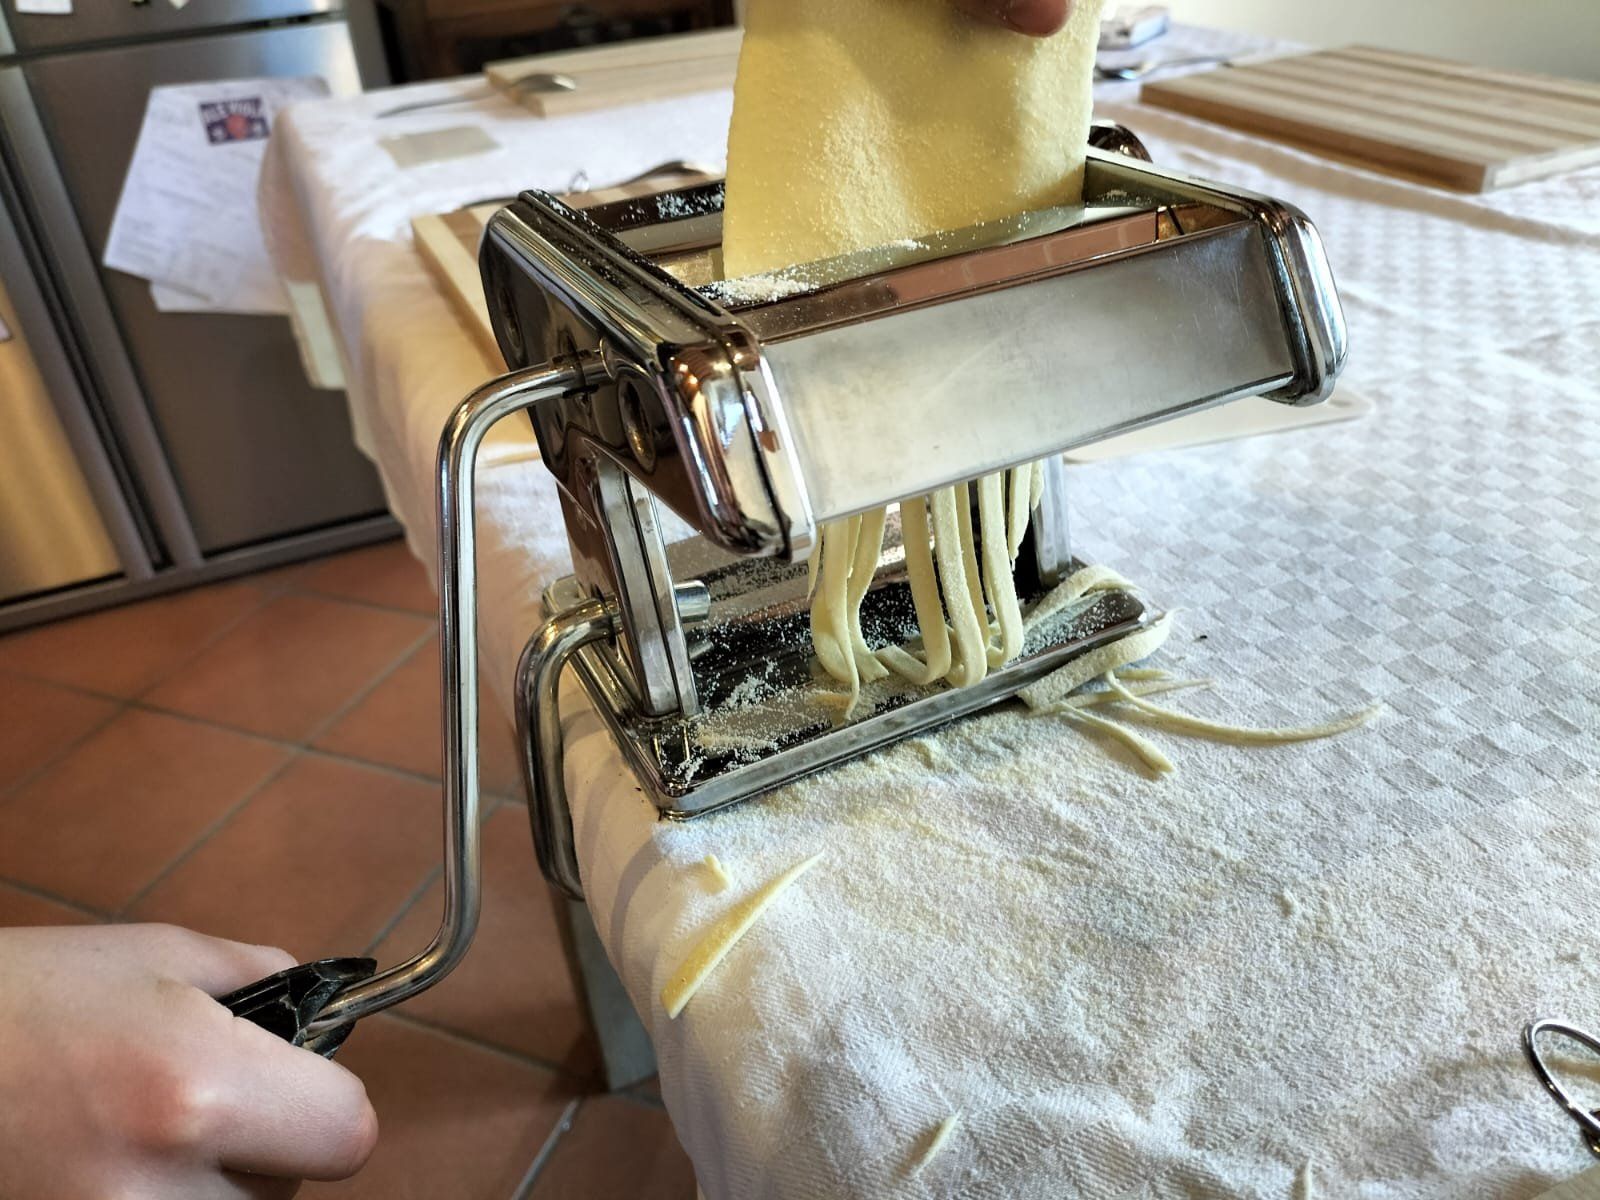 Francesco Grazzini: Homemade pasta and Lunch in the heart of Chianti - Book  Online - Cookly